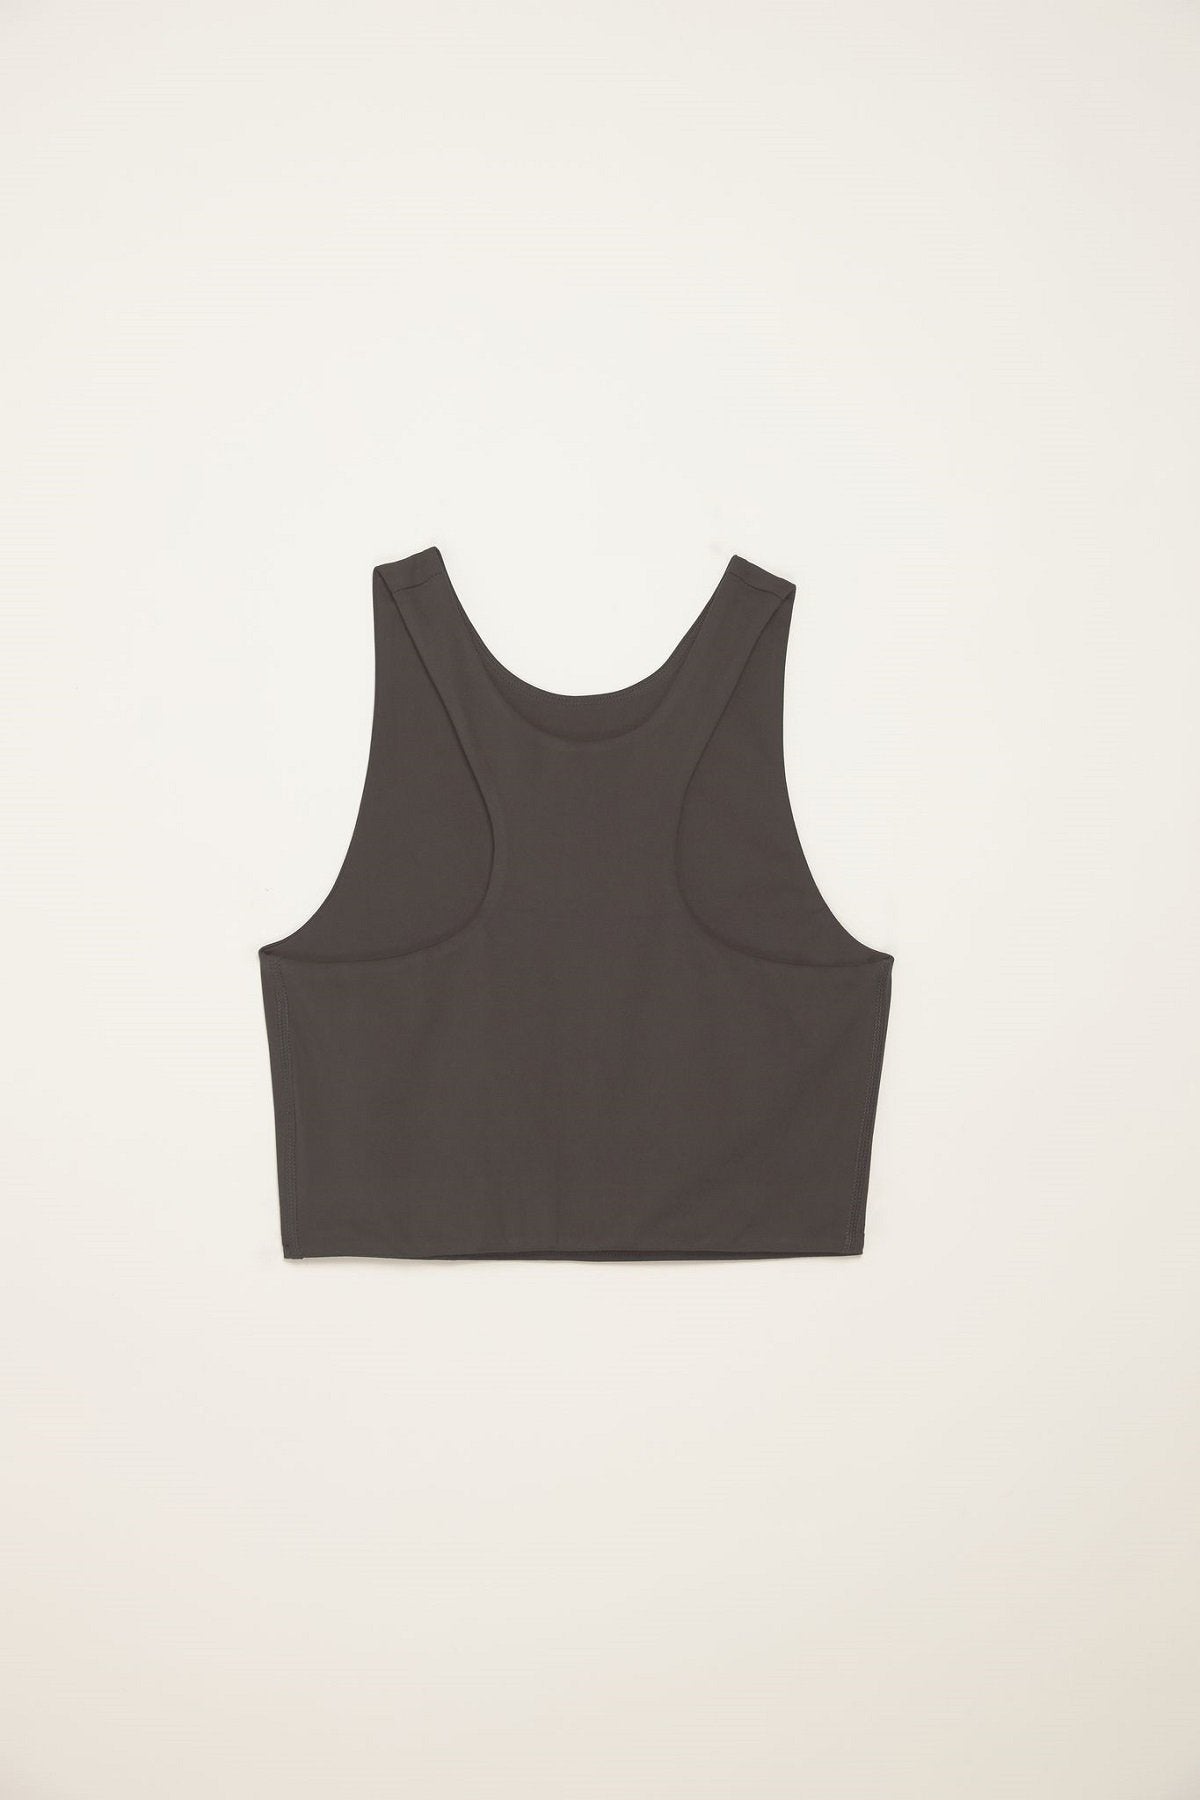 Girlfriend Collective Dylan Crop Tank Bra - Made from Recycled Plastic Bottles Moon Underwear